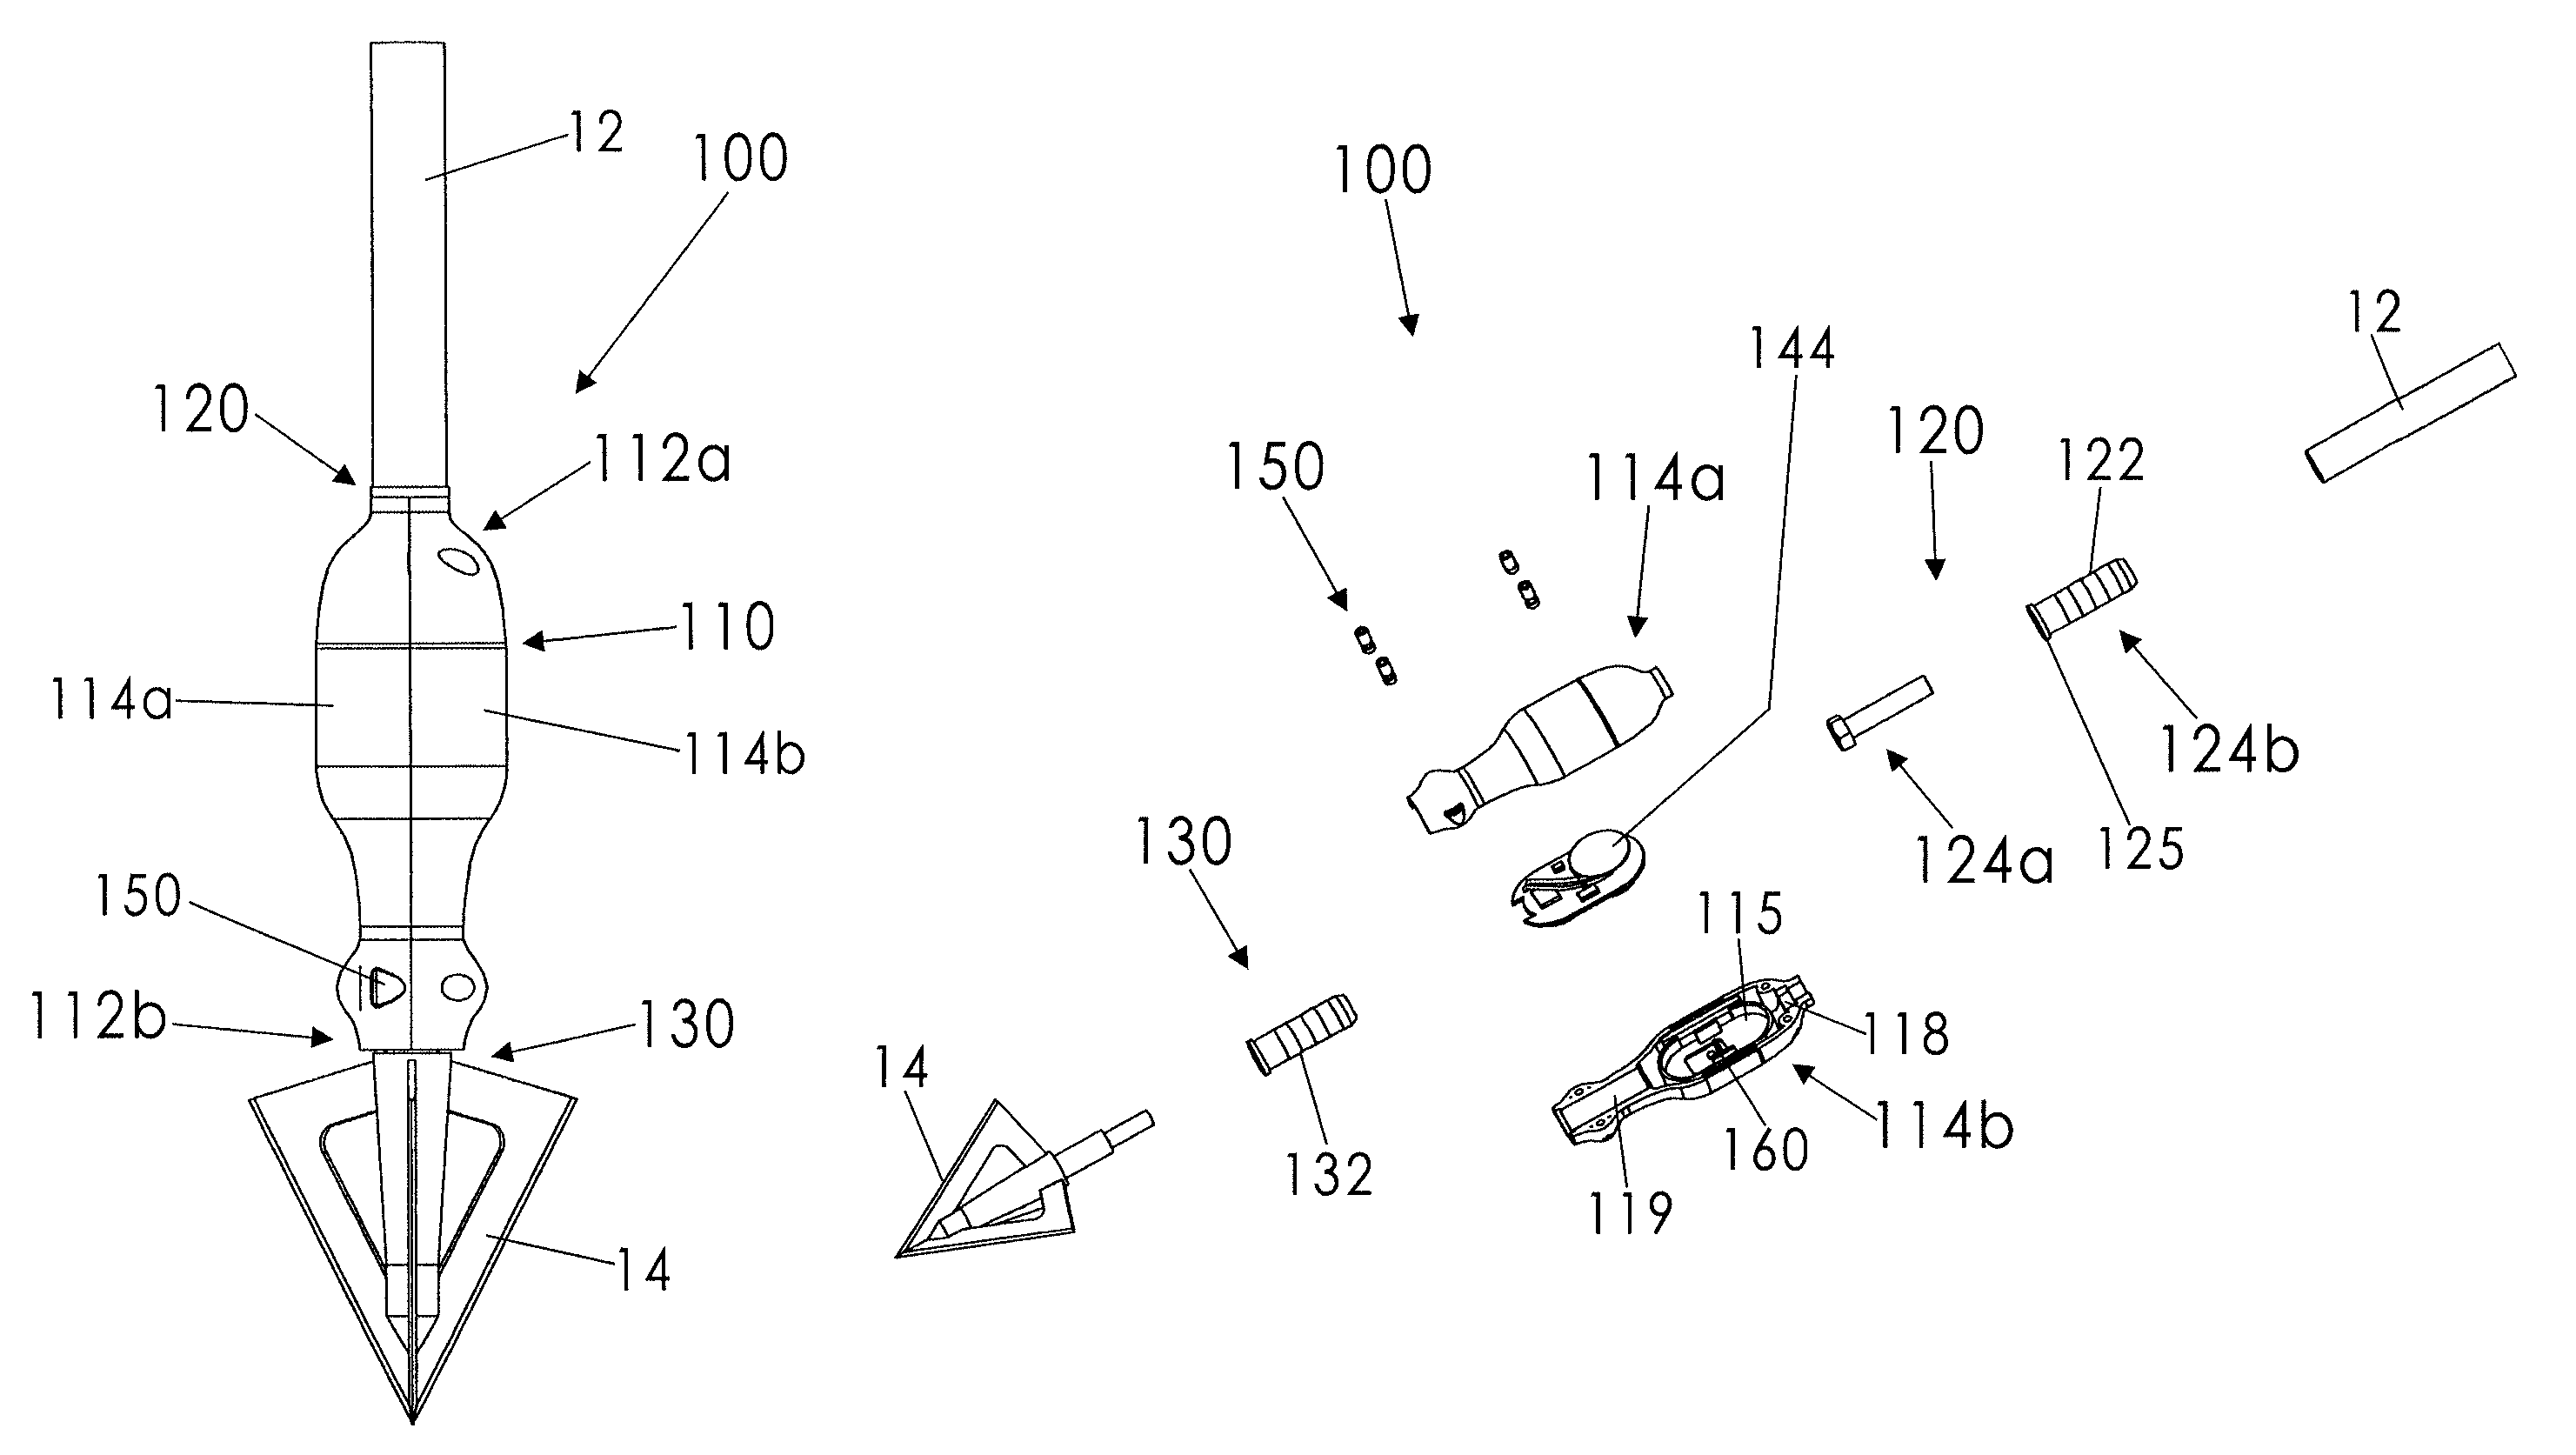 Tracking system for use with an arrow